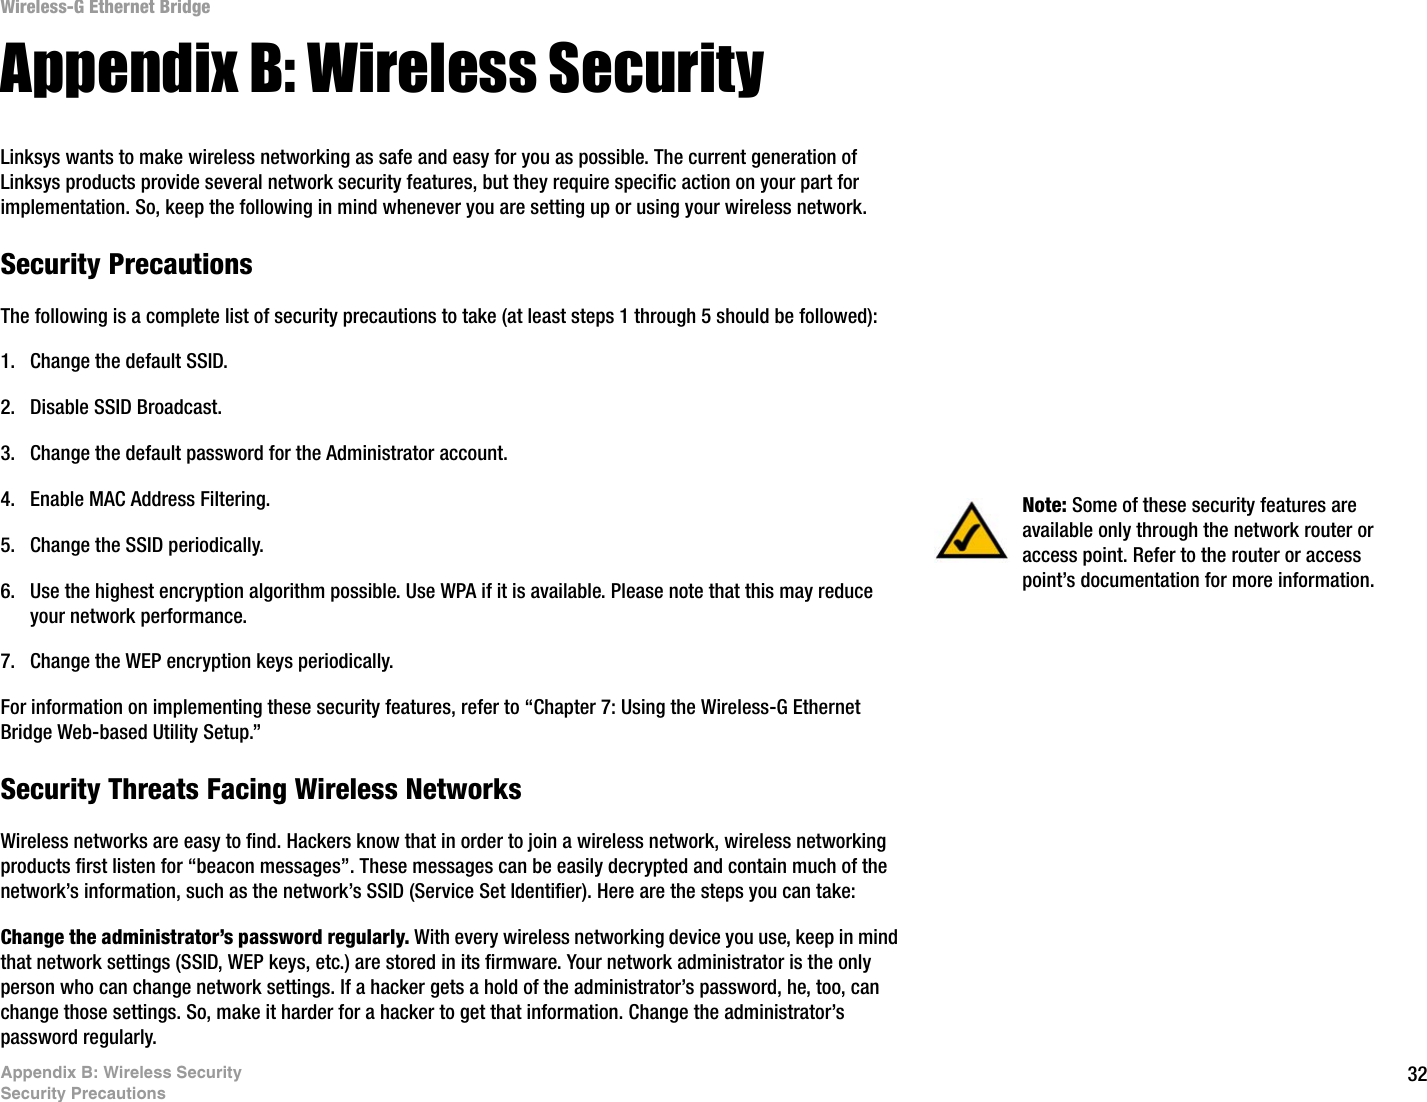 32Appendix B: Wireless SecuritySecurity PrecautionsWireless-G Ethernet BridgeAppendix B: Wireless SecurityLinksys wants to make wireless networking as safe and easy for you as possible. The current generation of Linksys products provide several network security features, but they require specific action on your part for implementation. So, keep the following in mind whenever you are setting up or using your wireless network.Security PrecautionsThe following is a complete list of security precautions to take (at least steps 1 through 5 should be followed):1. Change the default SSID. 2. Disable SSID Broadcast. 3. Change the default password for the Administrator account. 4. Enable MAC Address Filtering. 5. Change the SSID periodically. 6. Use the highest encryption algorithm possible. Use WPA if it is available. Please note that this may reduce your network performance. 7. Change the WEP encryption keys periodically. For information on implementing these security features, refer to “Chapter 7: Using the Wireless-G Ethernet Bridge Web-based Utility Setup.”Security Threats Facing Wireless Networks Wireless networks are easy to find. Hackers know that in order to join a wireless network, wireless networking products first listen for “beacon messages”. These messages can be easily decrypted and contain much of the network’s information, such as the network’s SSID (Service Set Identifier). Here are the steps you can take:Change the administrator’s password regularly. With every wireless networking device you use, keep in mind that network settings (SSID, WEP keys, etc.) are stored in its firmware. Your network administrator is the only person who can change network settings. If a hacker gets a hold of the administrator’s password, he, too, can change those settings. So, make it harder for a hacker to get that information. Change the administrator’s password regularly.Note: Some of these security features are available only through the network router or access point. Refer to the router or access point’s documentation for more information.